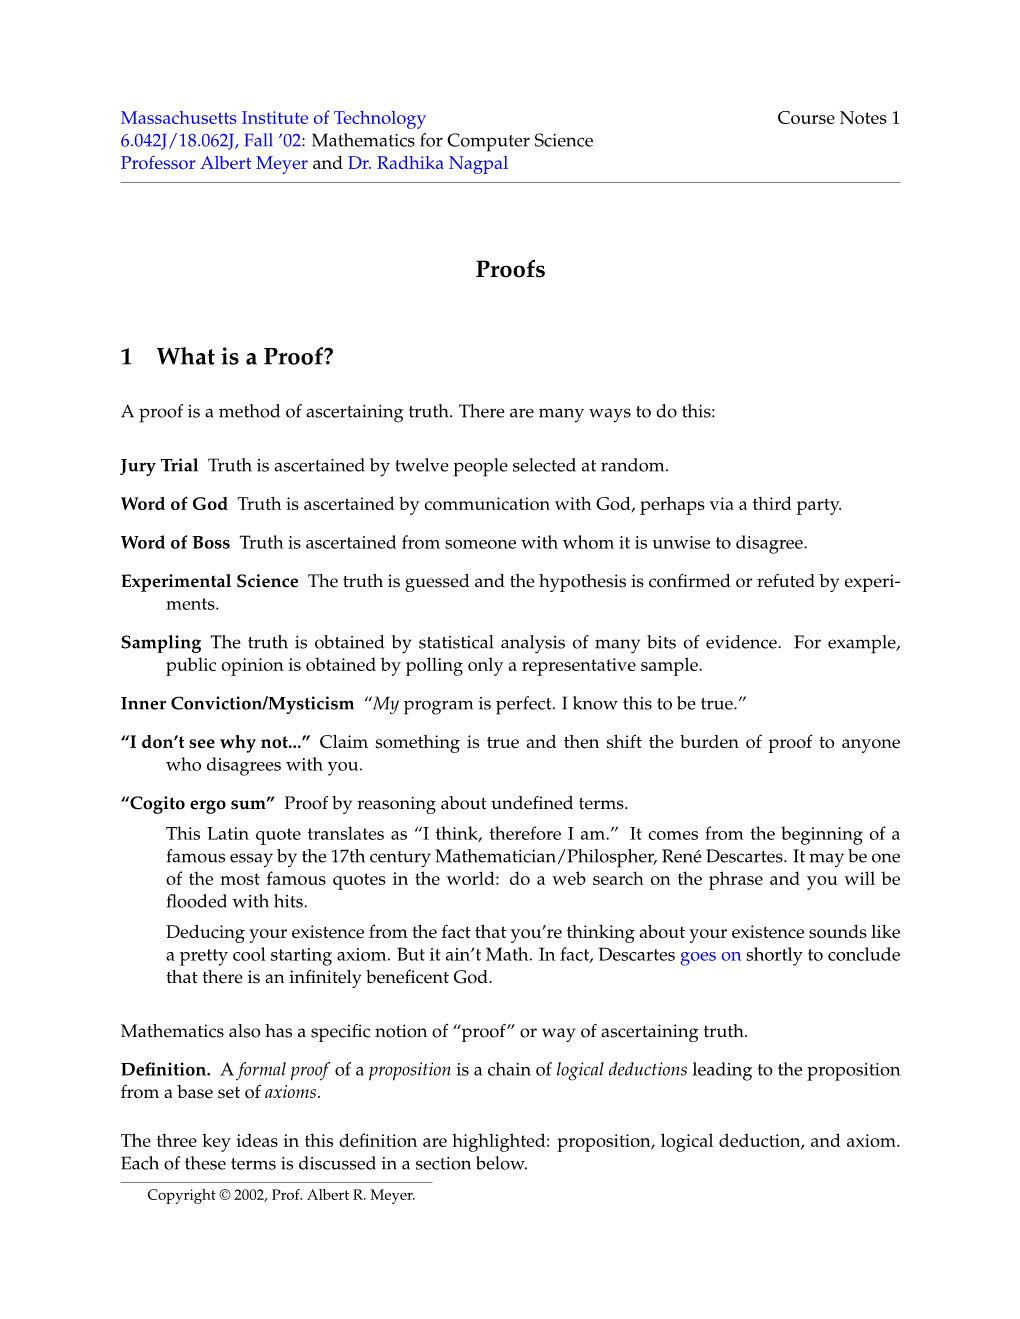 Proofs 1 What Is a Proof?